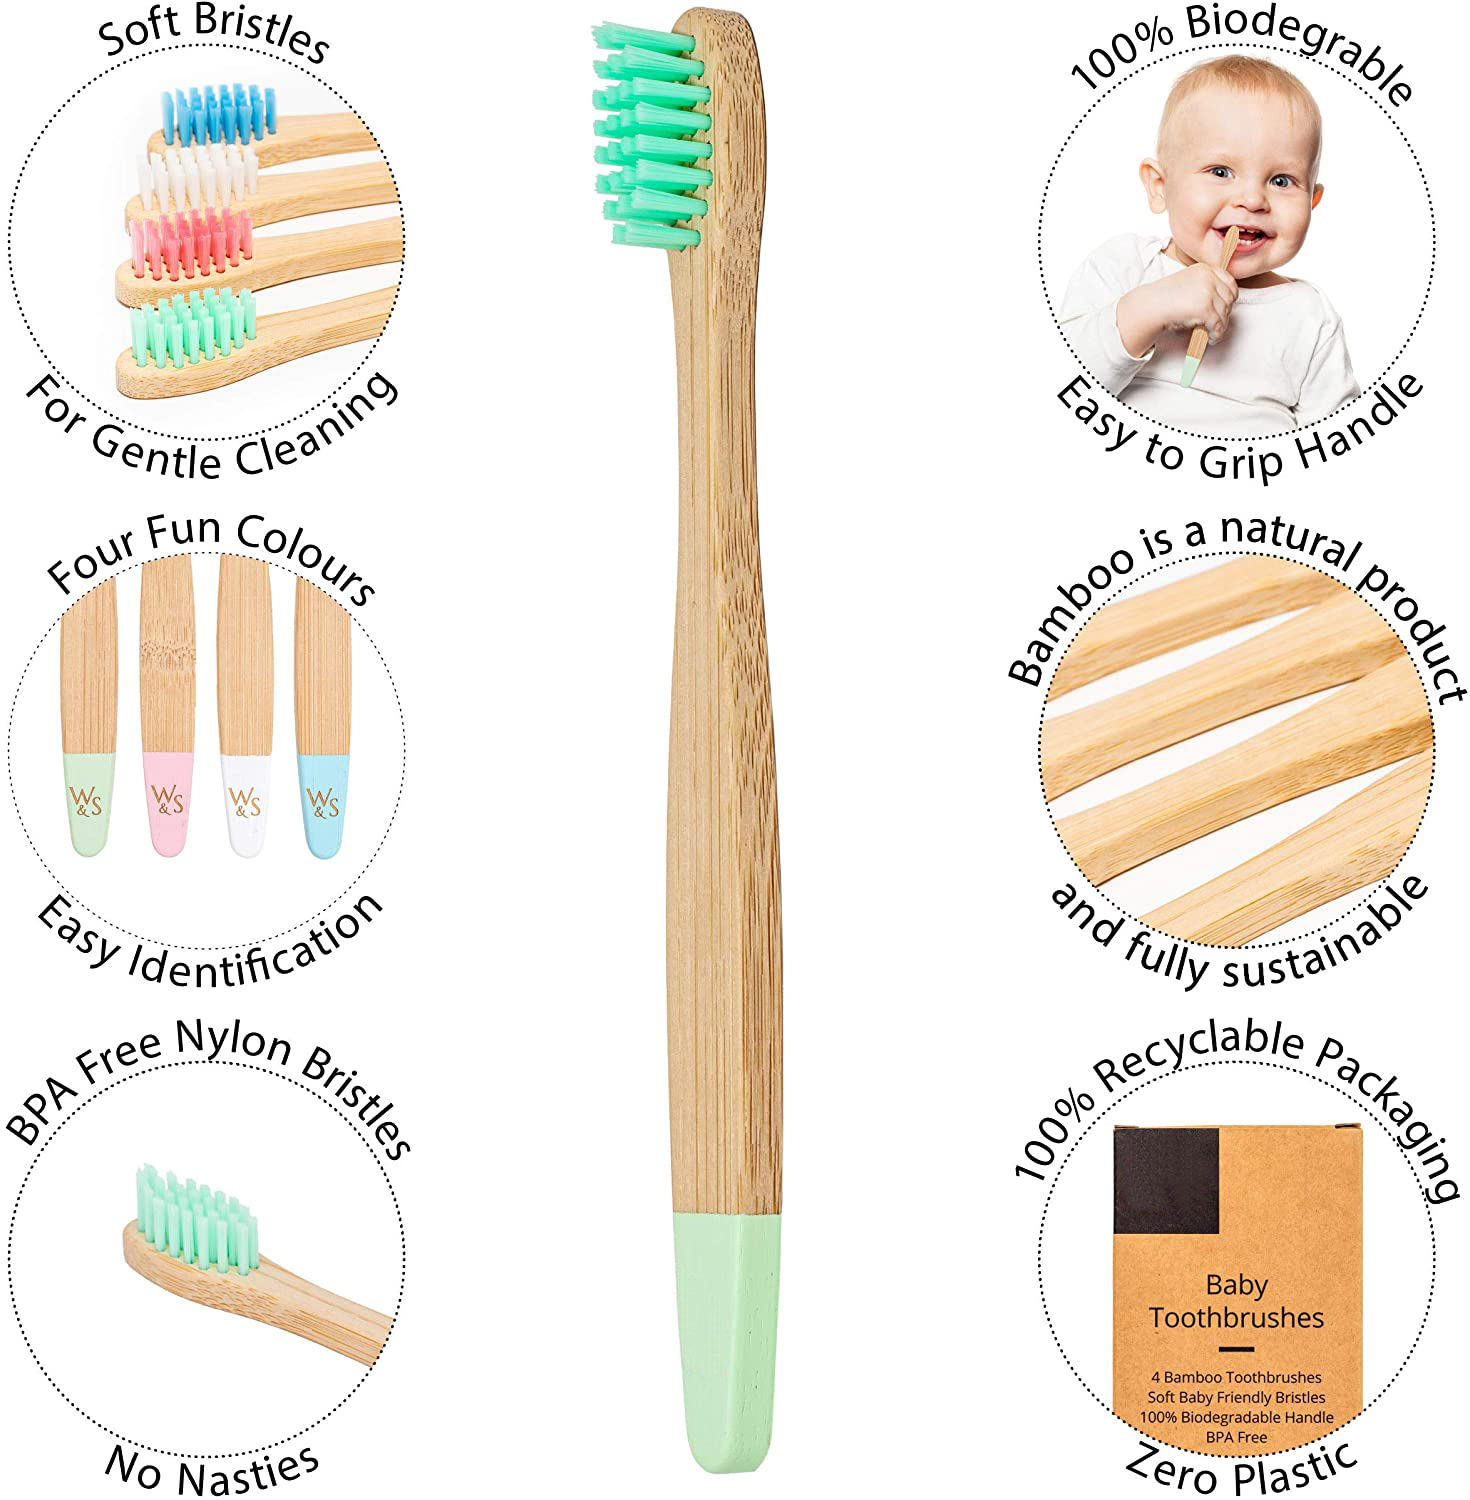 OEM Supply Bamboo Toothbrush Online - Biodegradable BPA Free Soft Bristles Natural Bamboo Toothbrushes For Kids – CHYM